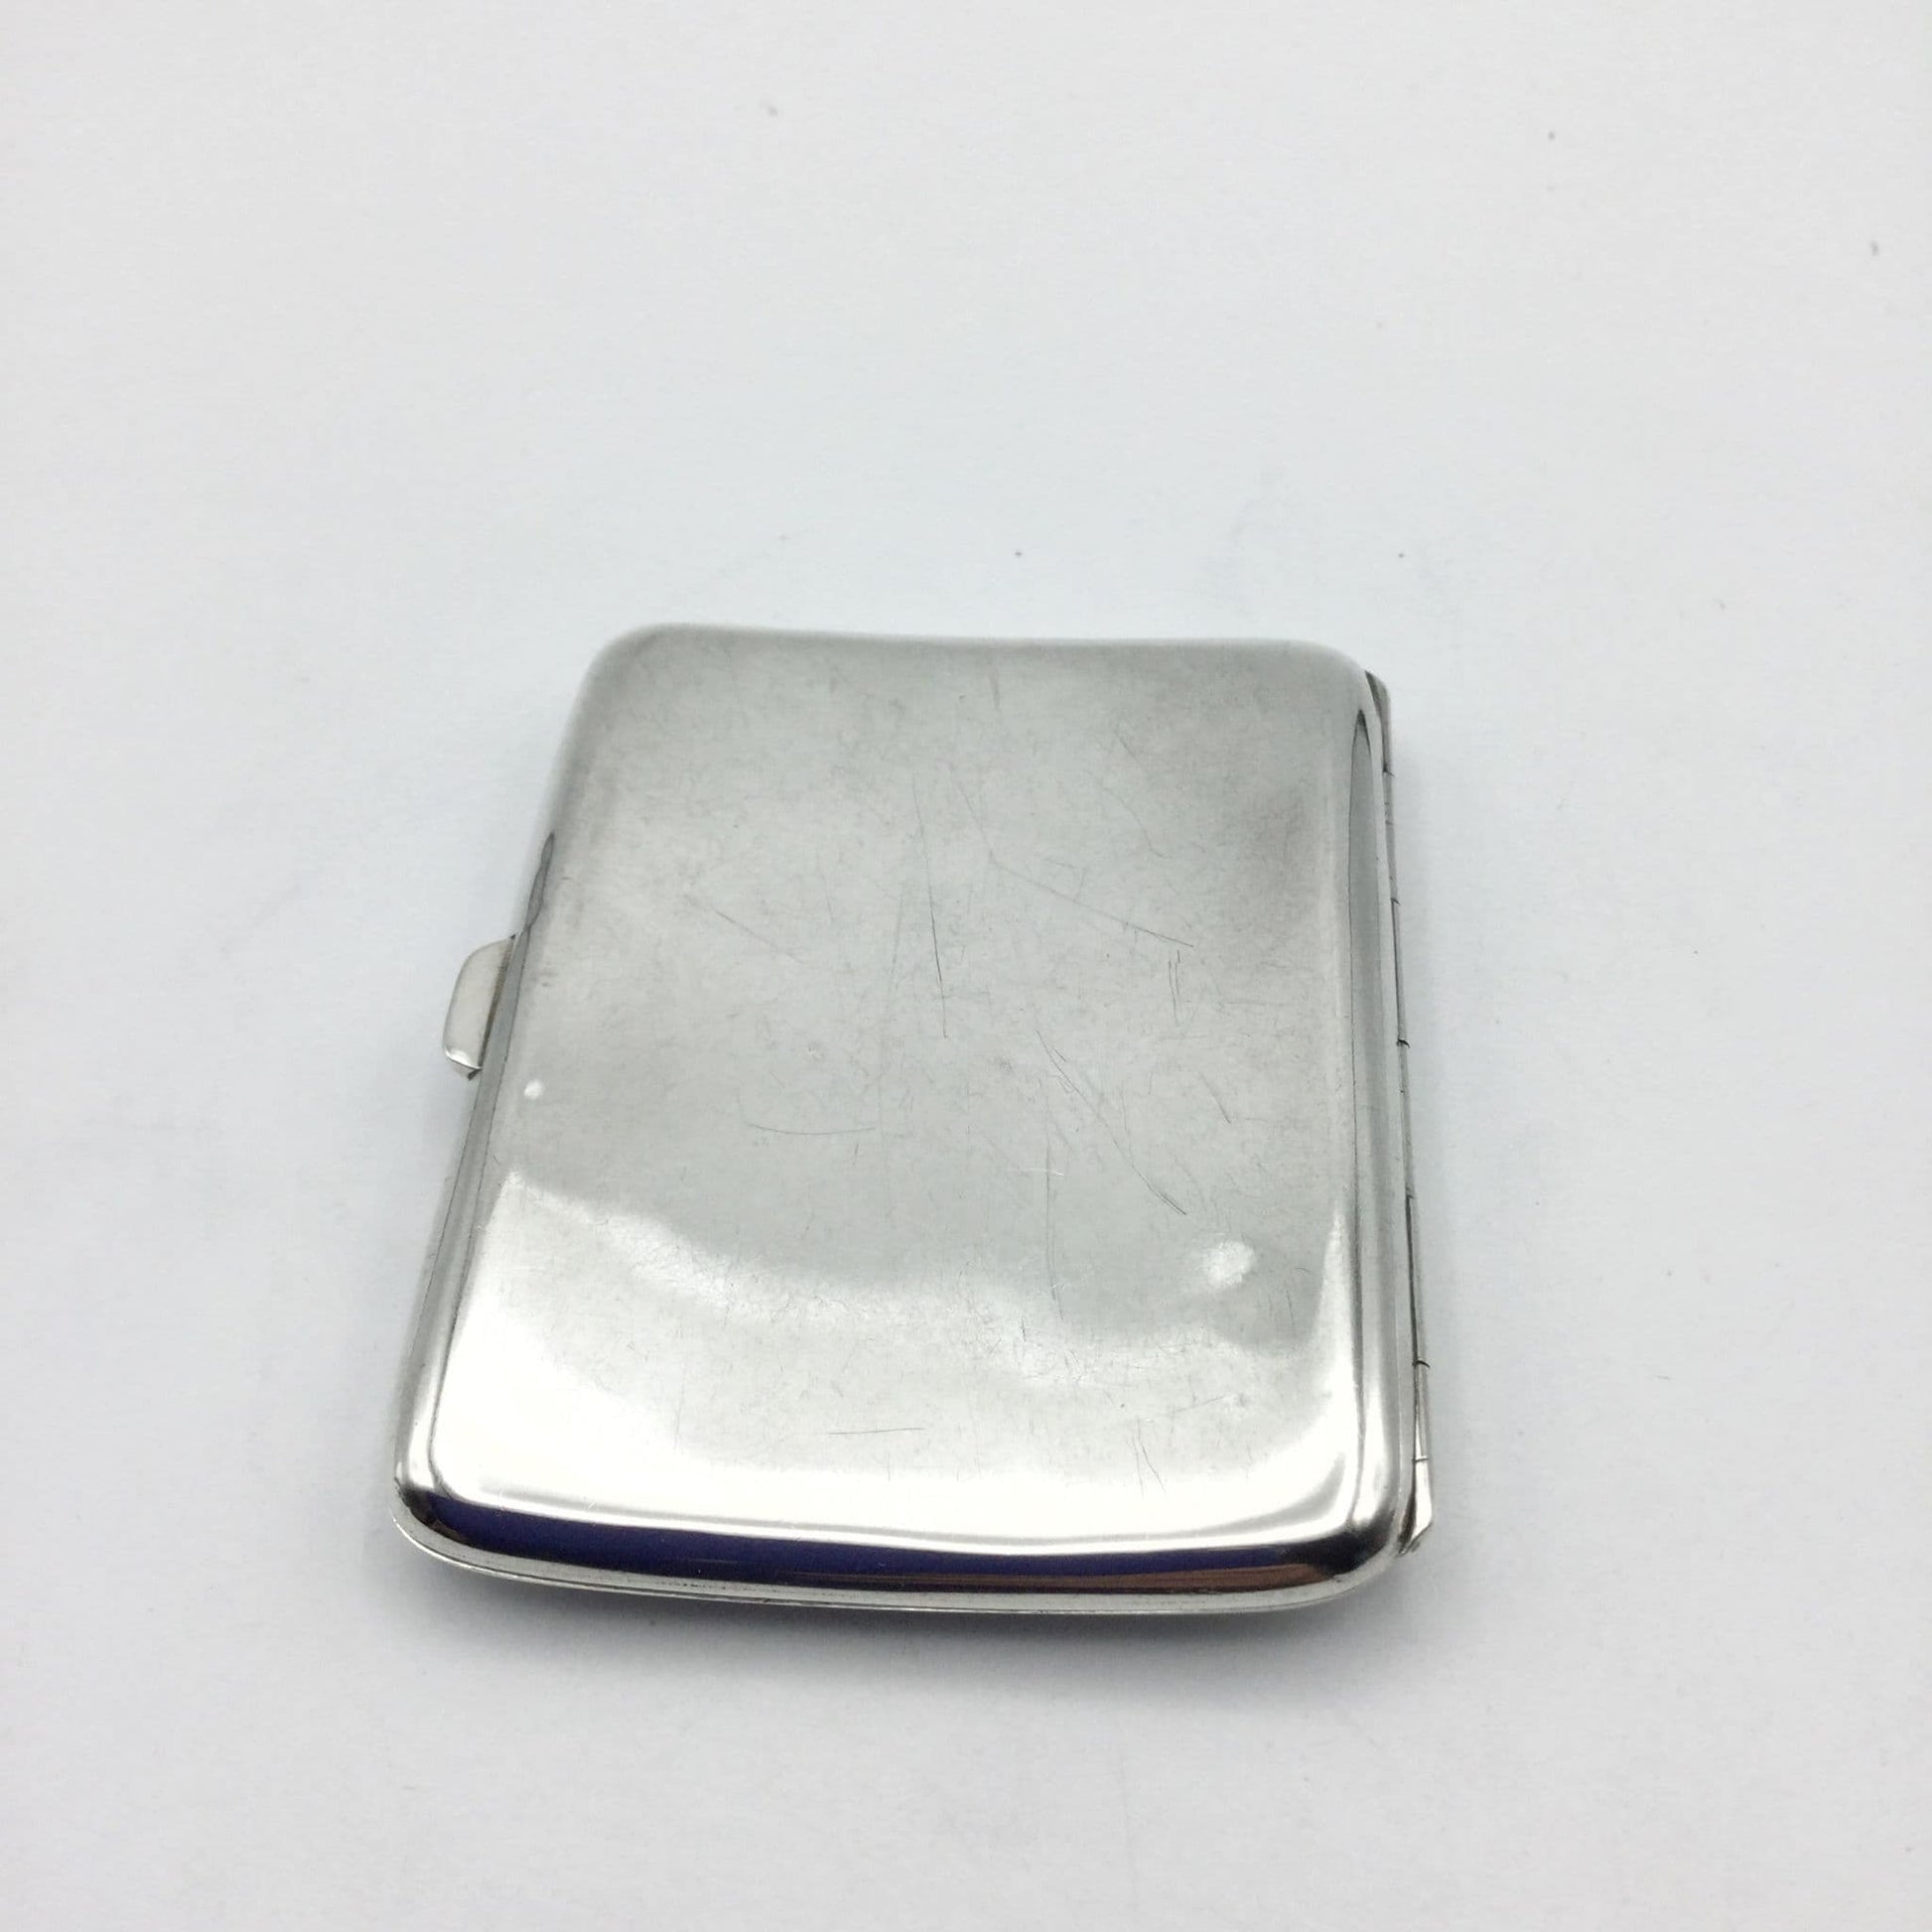 back of shiny 1910s solid silver cigarette case on a white background